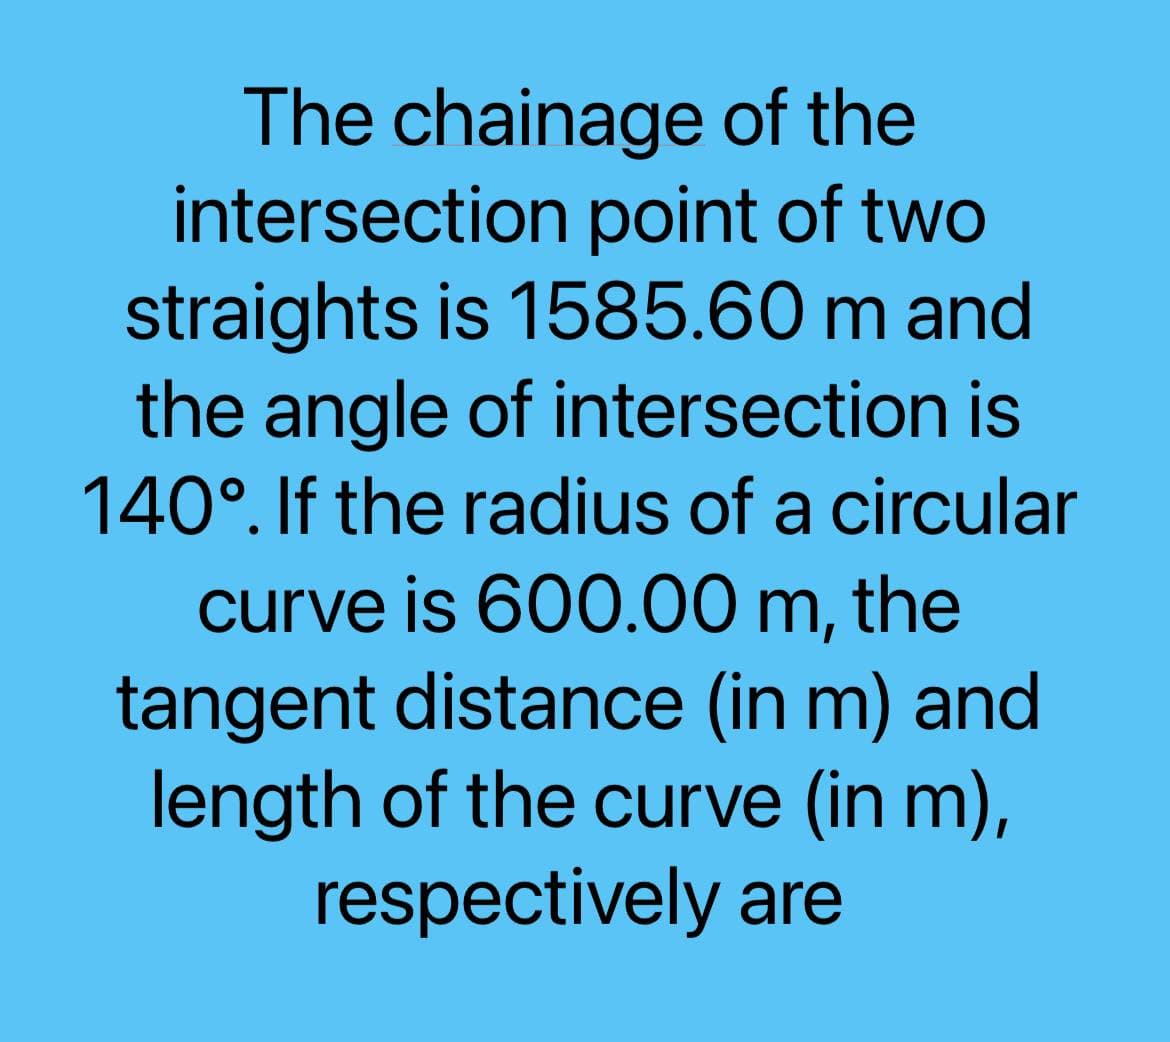 The chainage of the
intersection point of two
straights is 1585.60 m and
the angle of intersection is
140°. If the radius of a circular
curve is 600.00 m, the
tangent distance (in m) and
length of the curve (in m),
respectively are